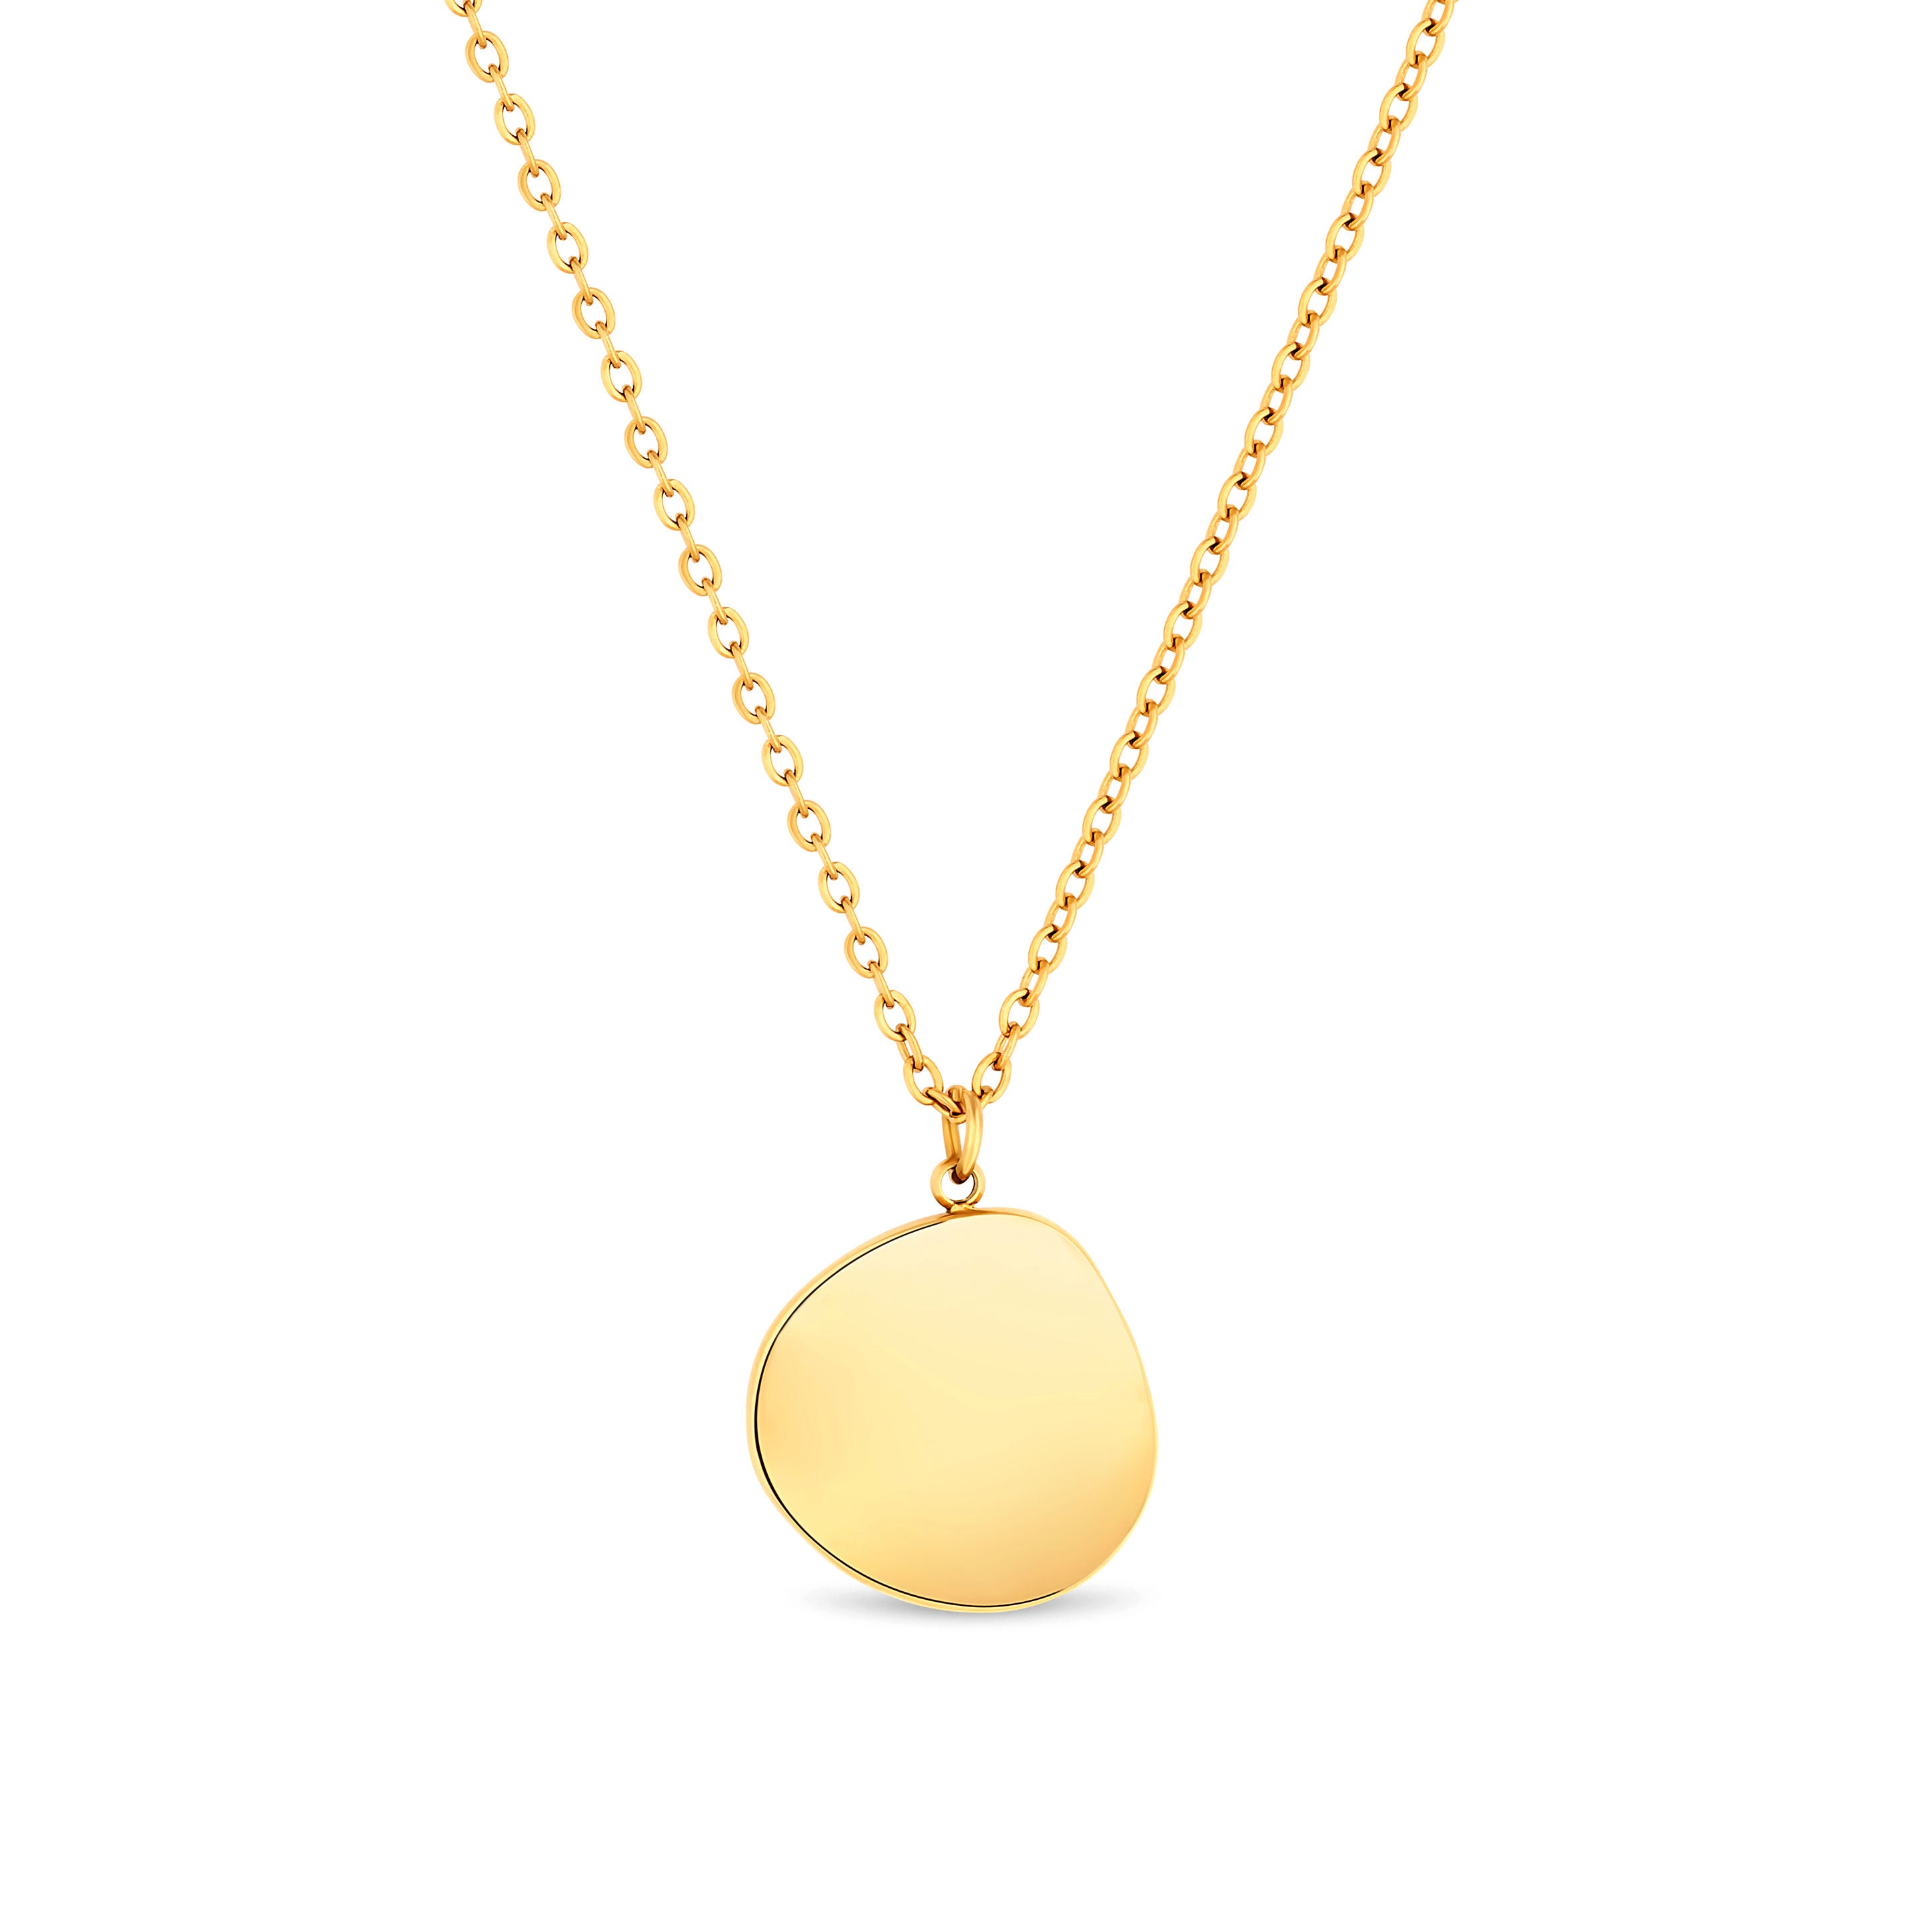 COMPASS NECKLACE - GOLD